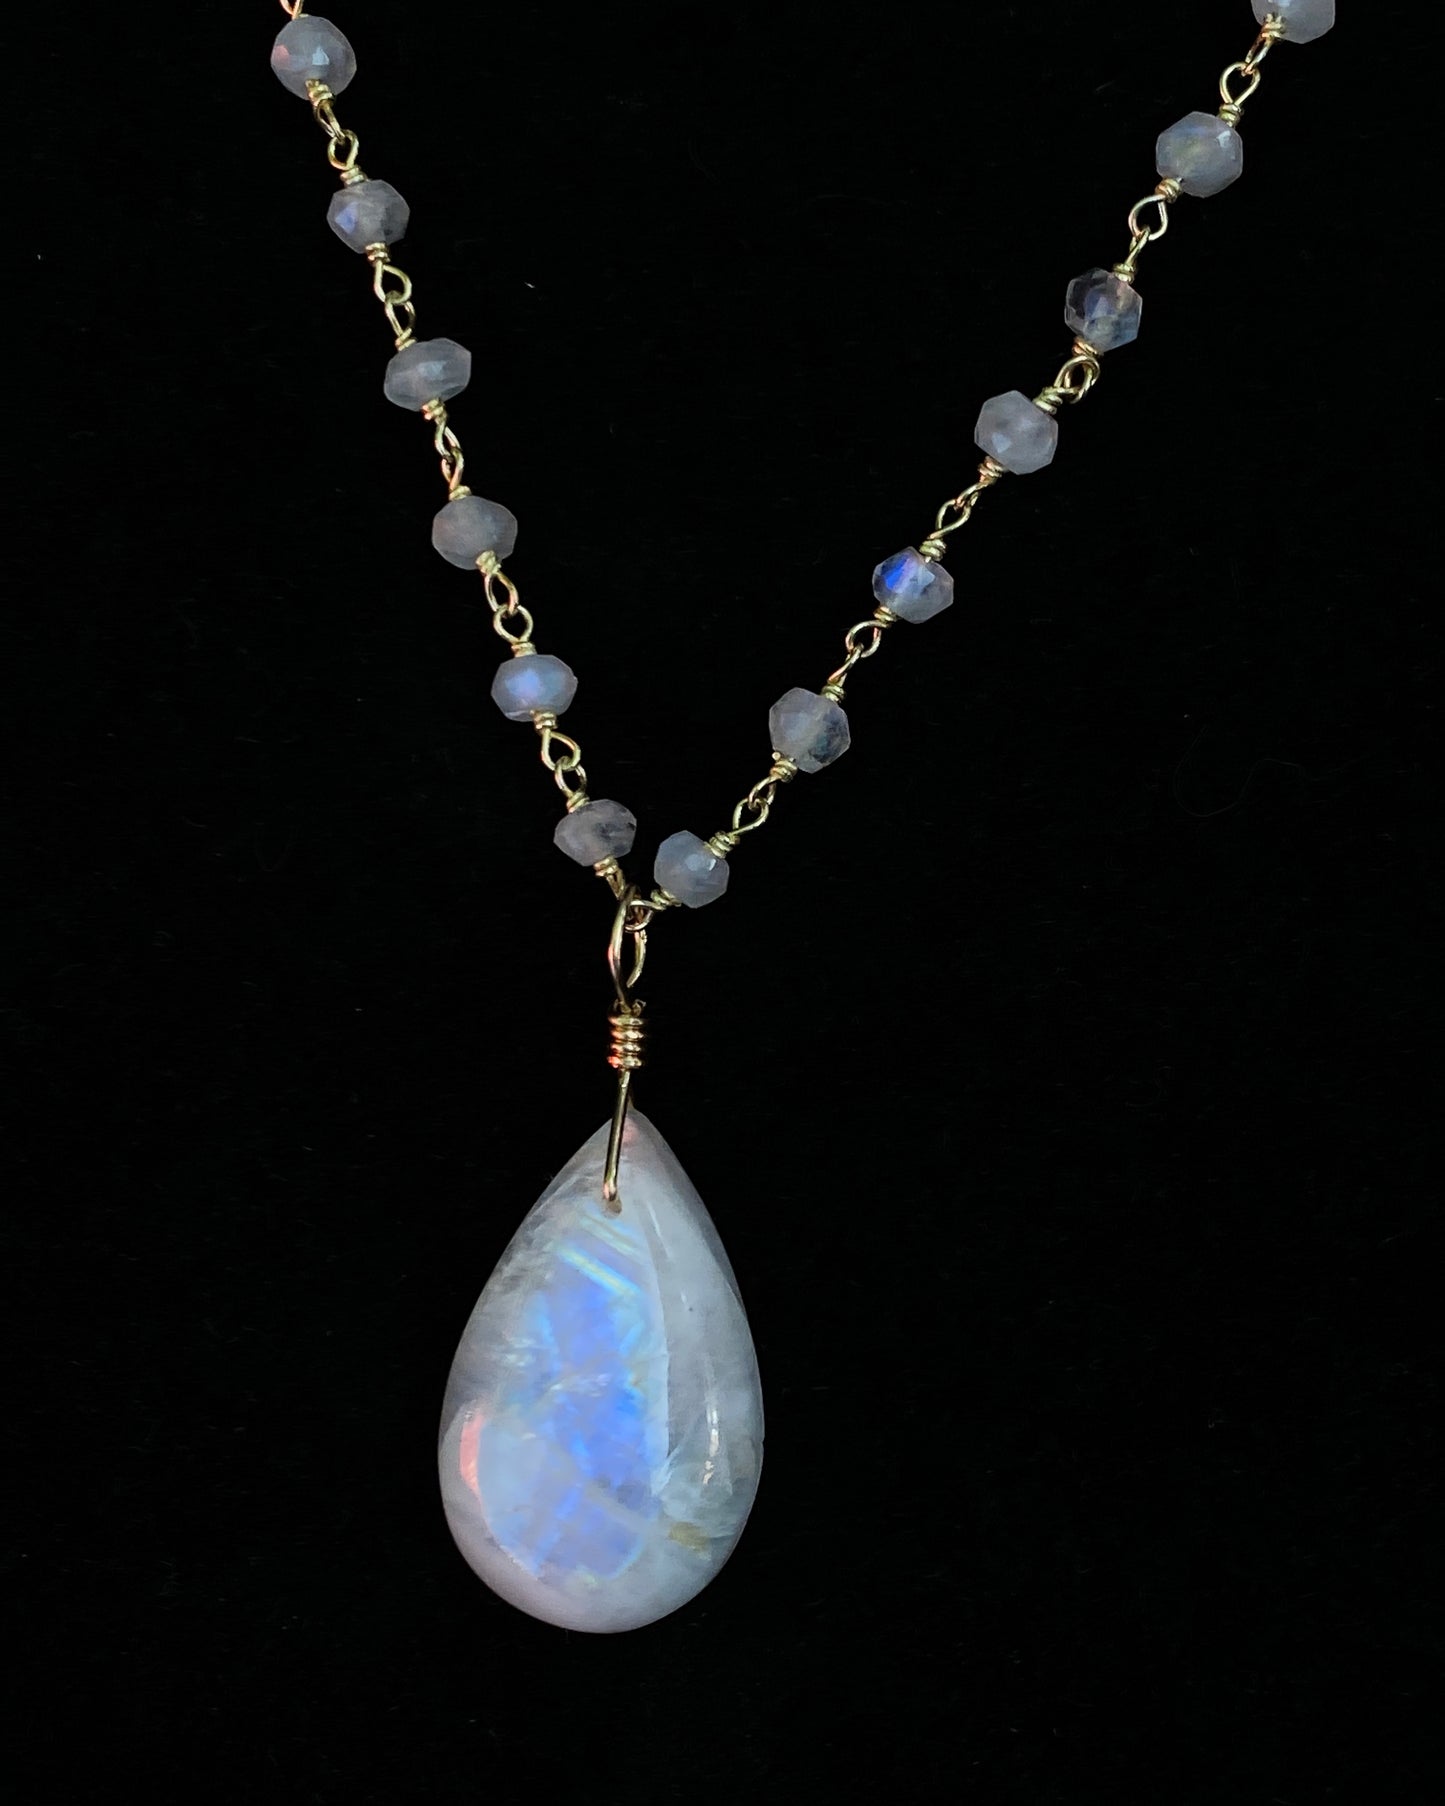 Genuine Moonstone gemstone pendant on gold fill chain Necklace